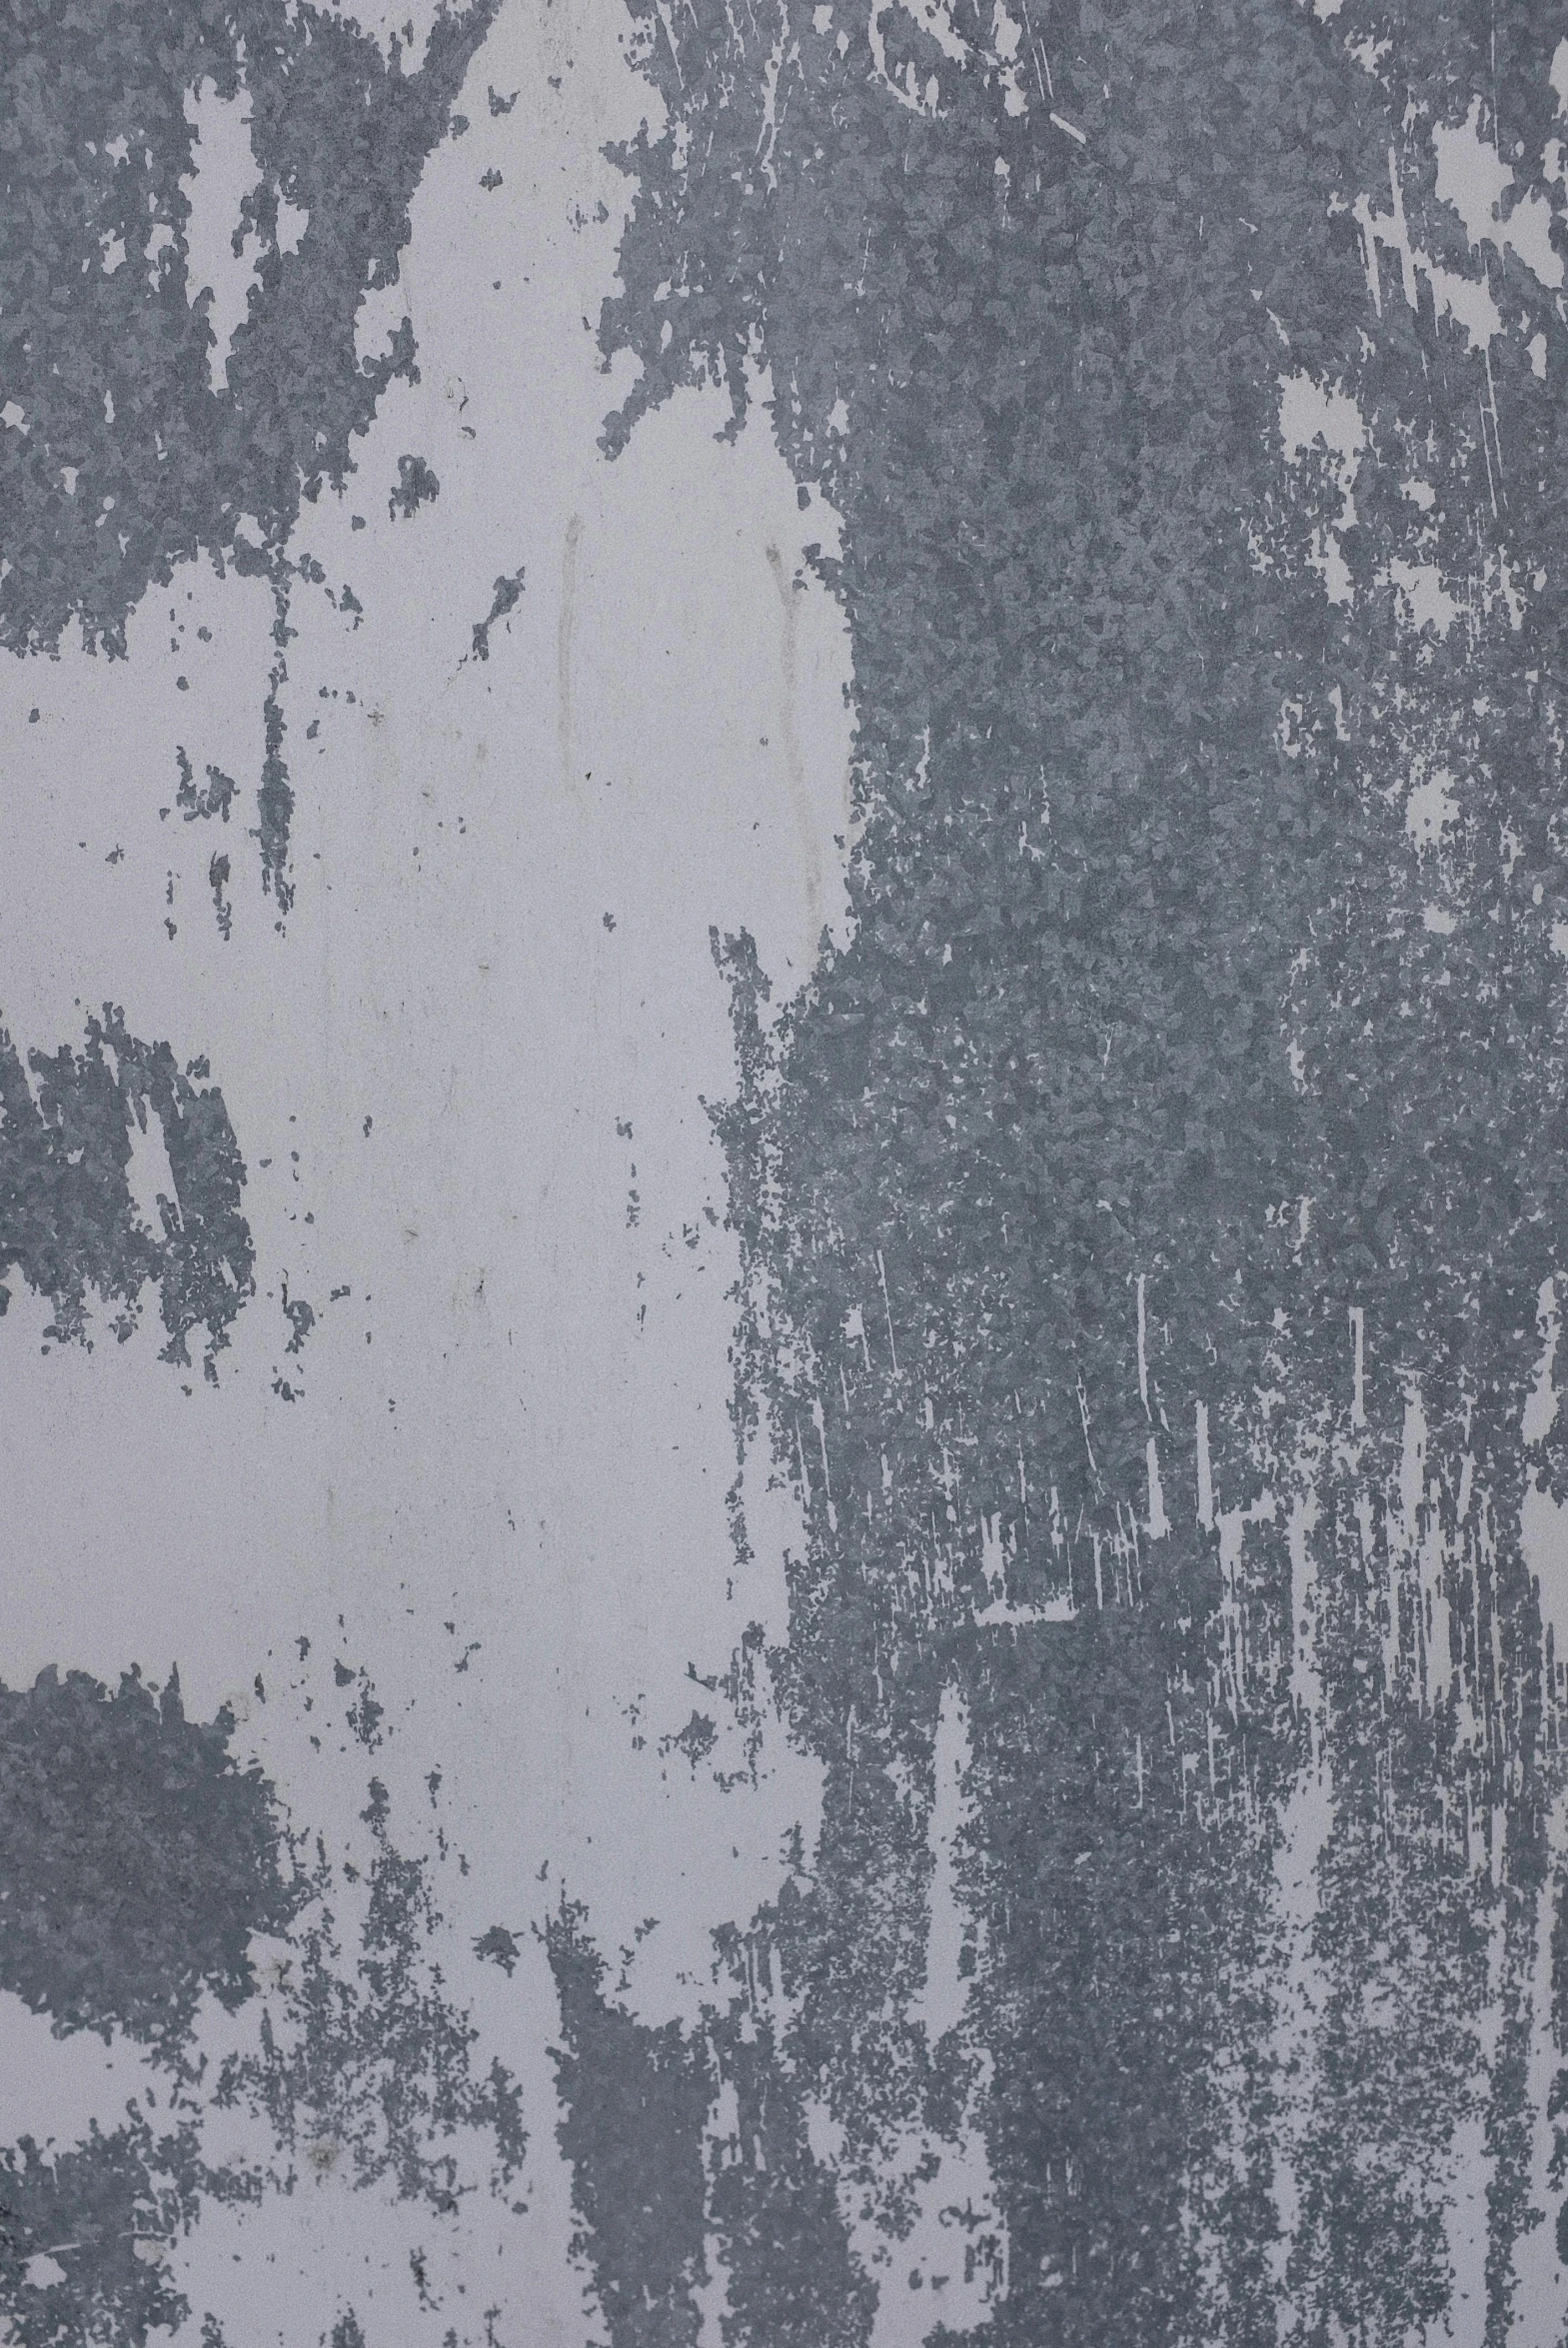 a black and white photo of a person on a skateboard, an etching, trending on reddit, lyrical abstraction, metal with chipped paint texture, background image, 144x144 canvas, detail texture